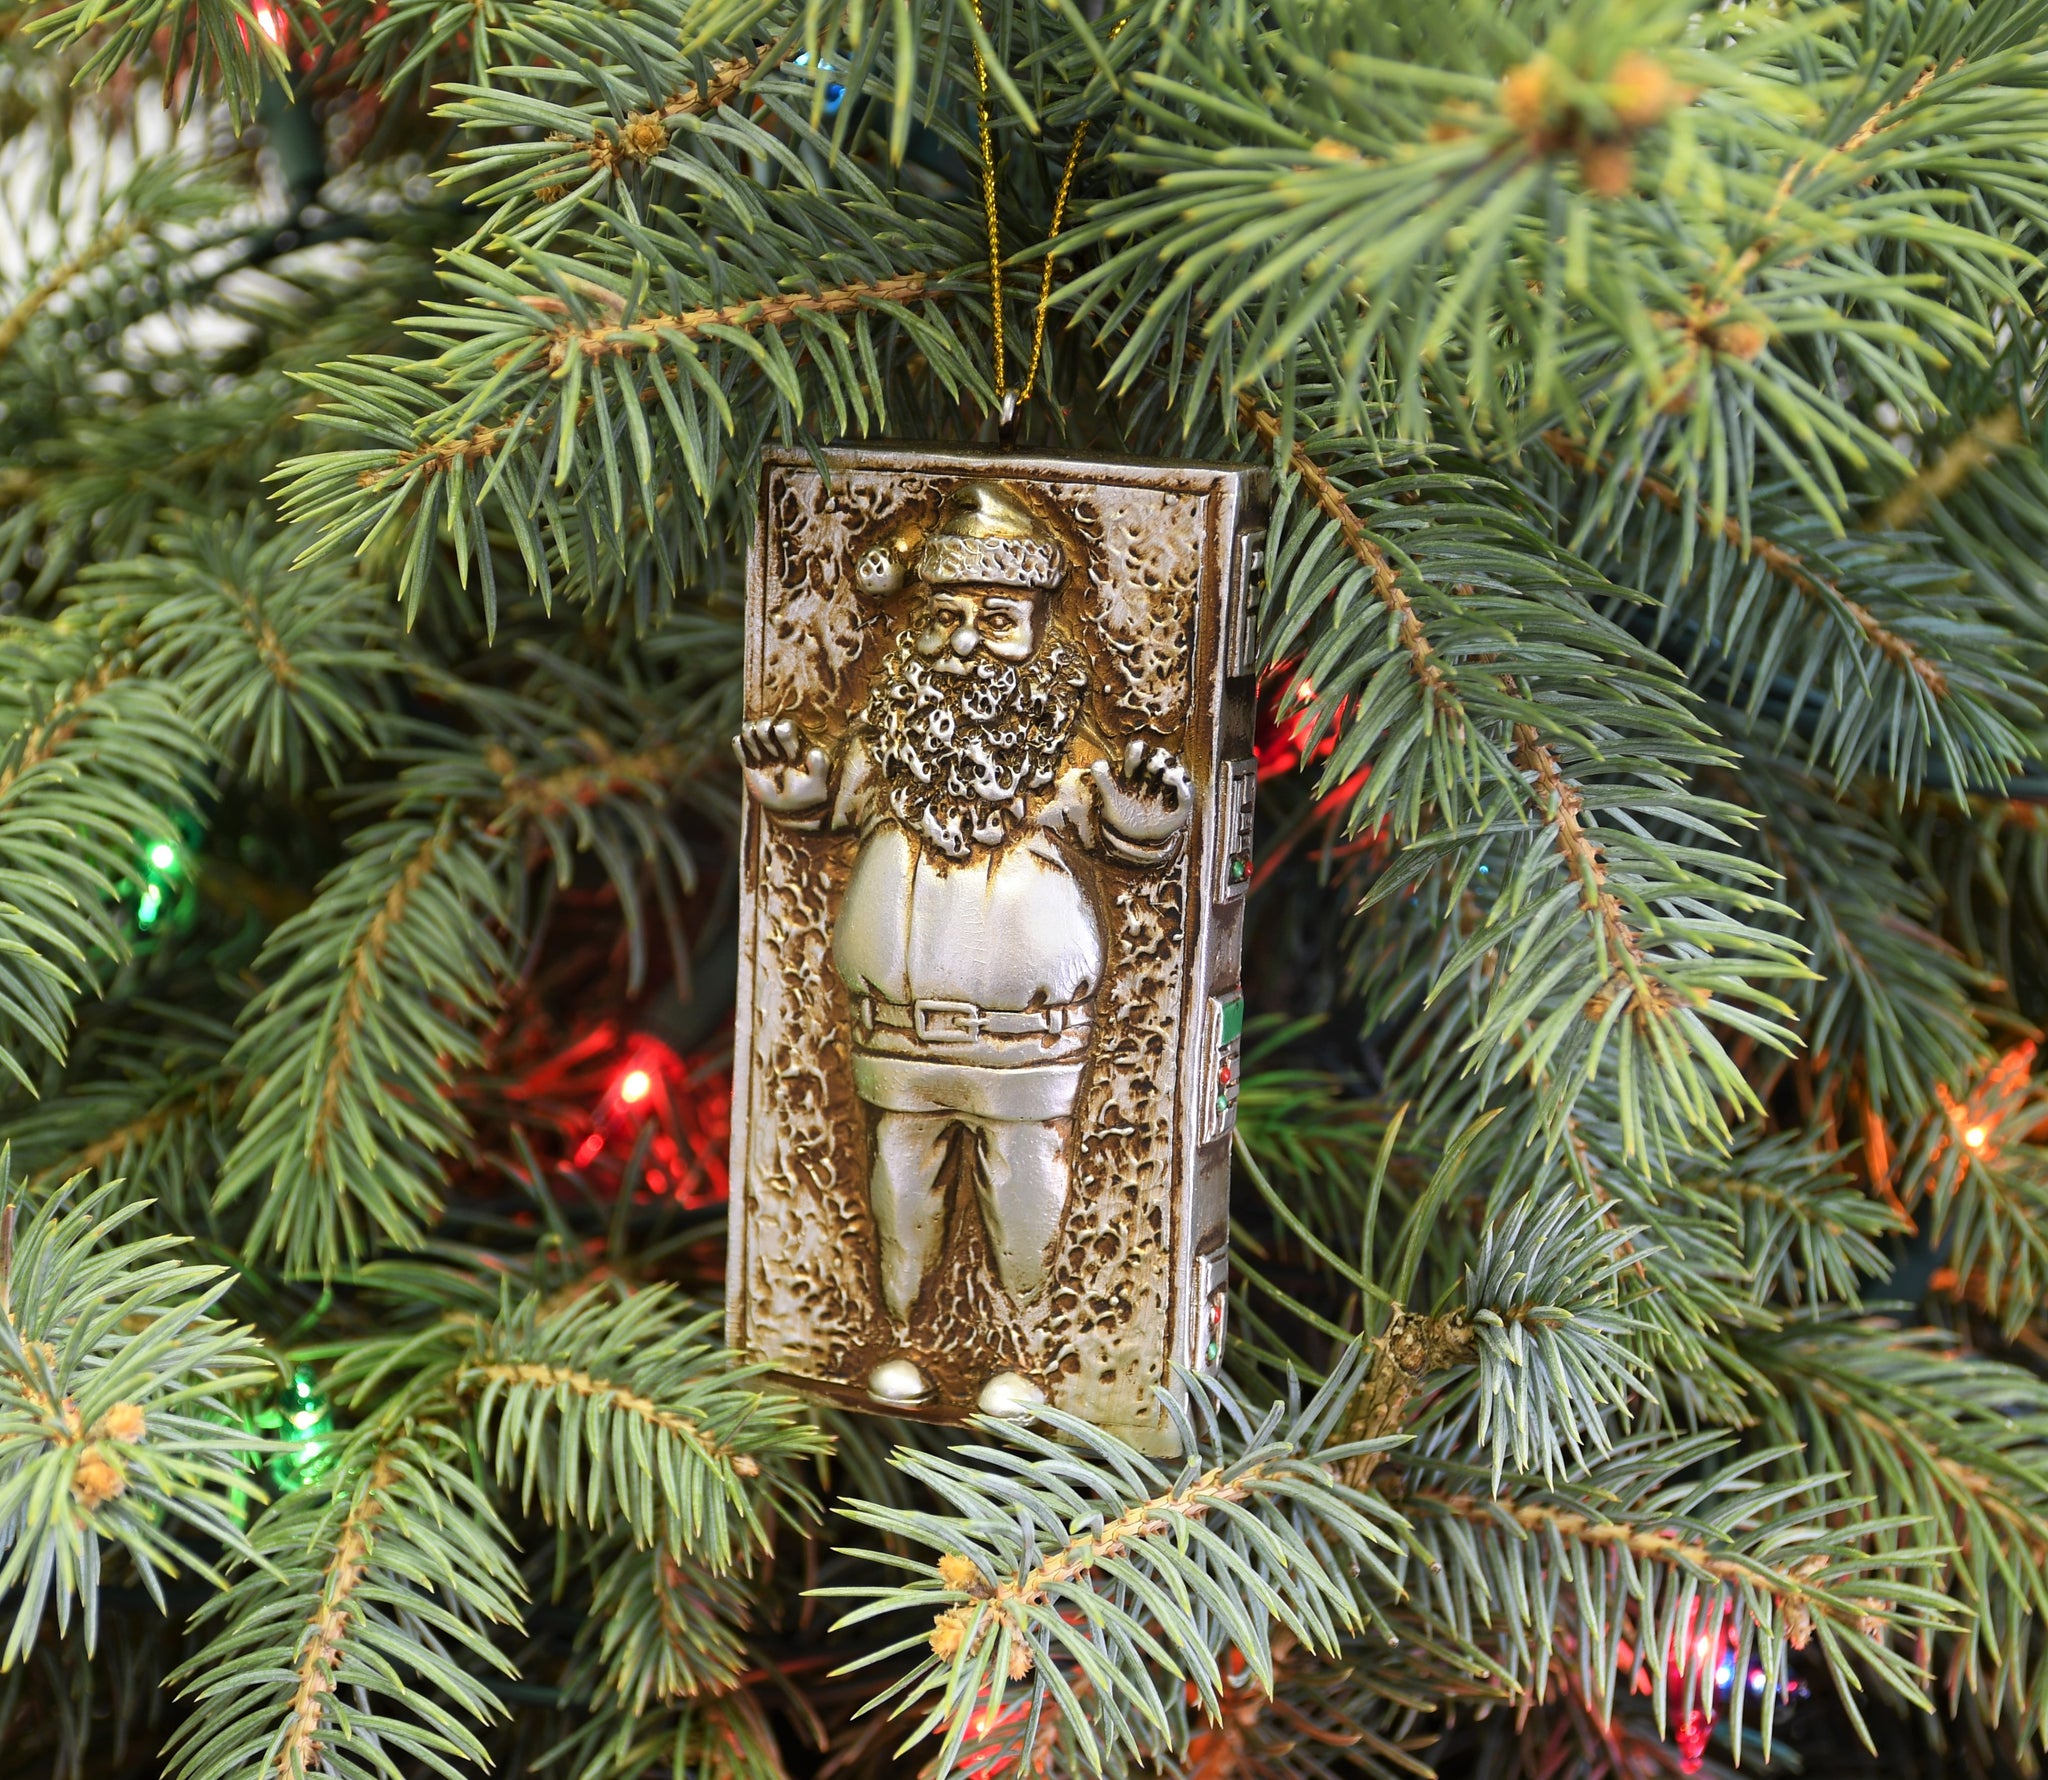 REVIEWED] 30 Best Star Wars Christmas Ornaments